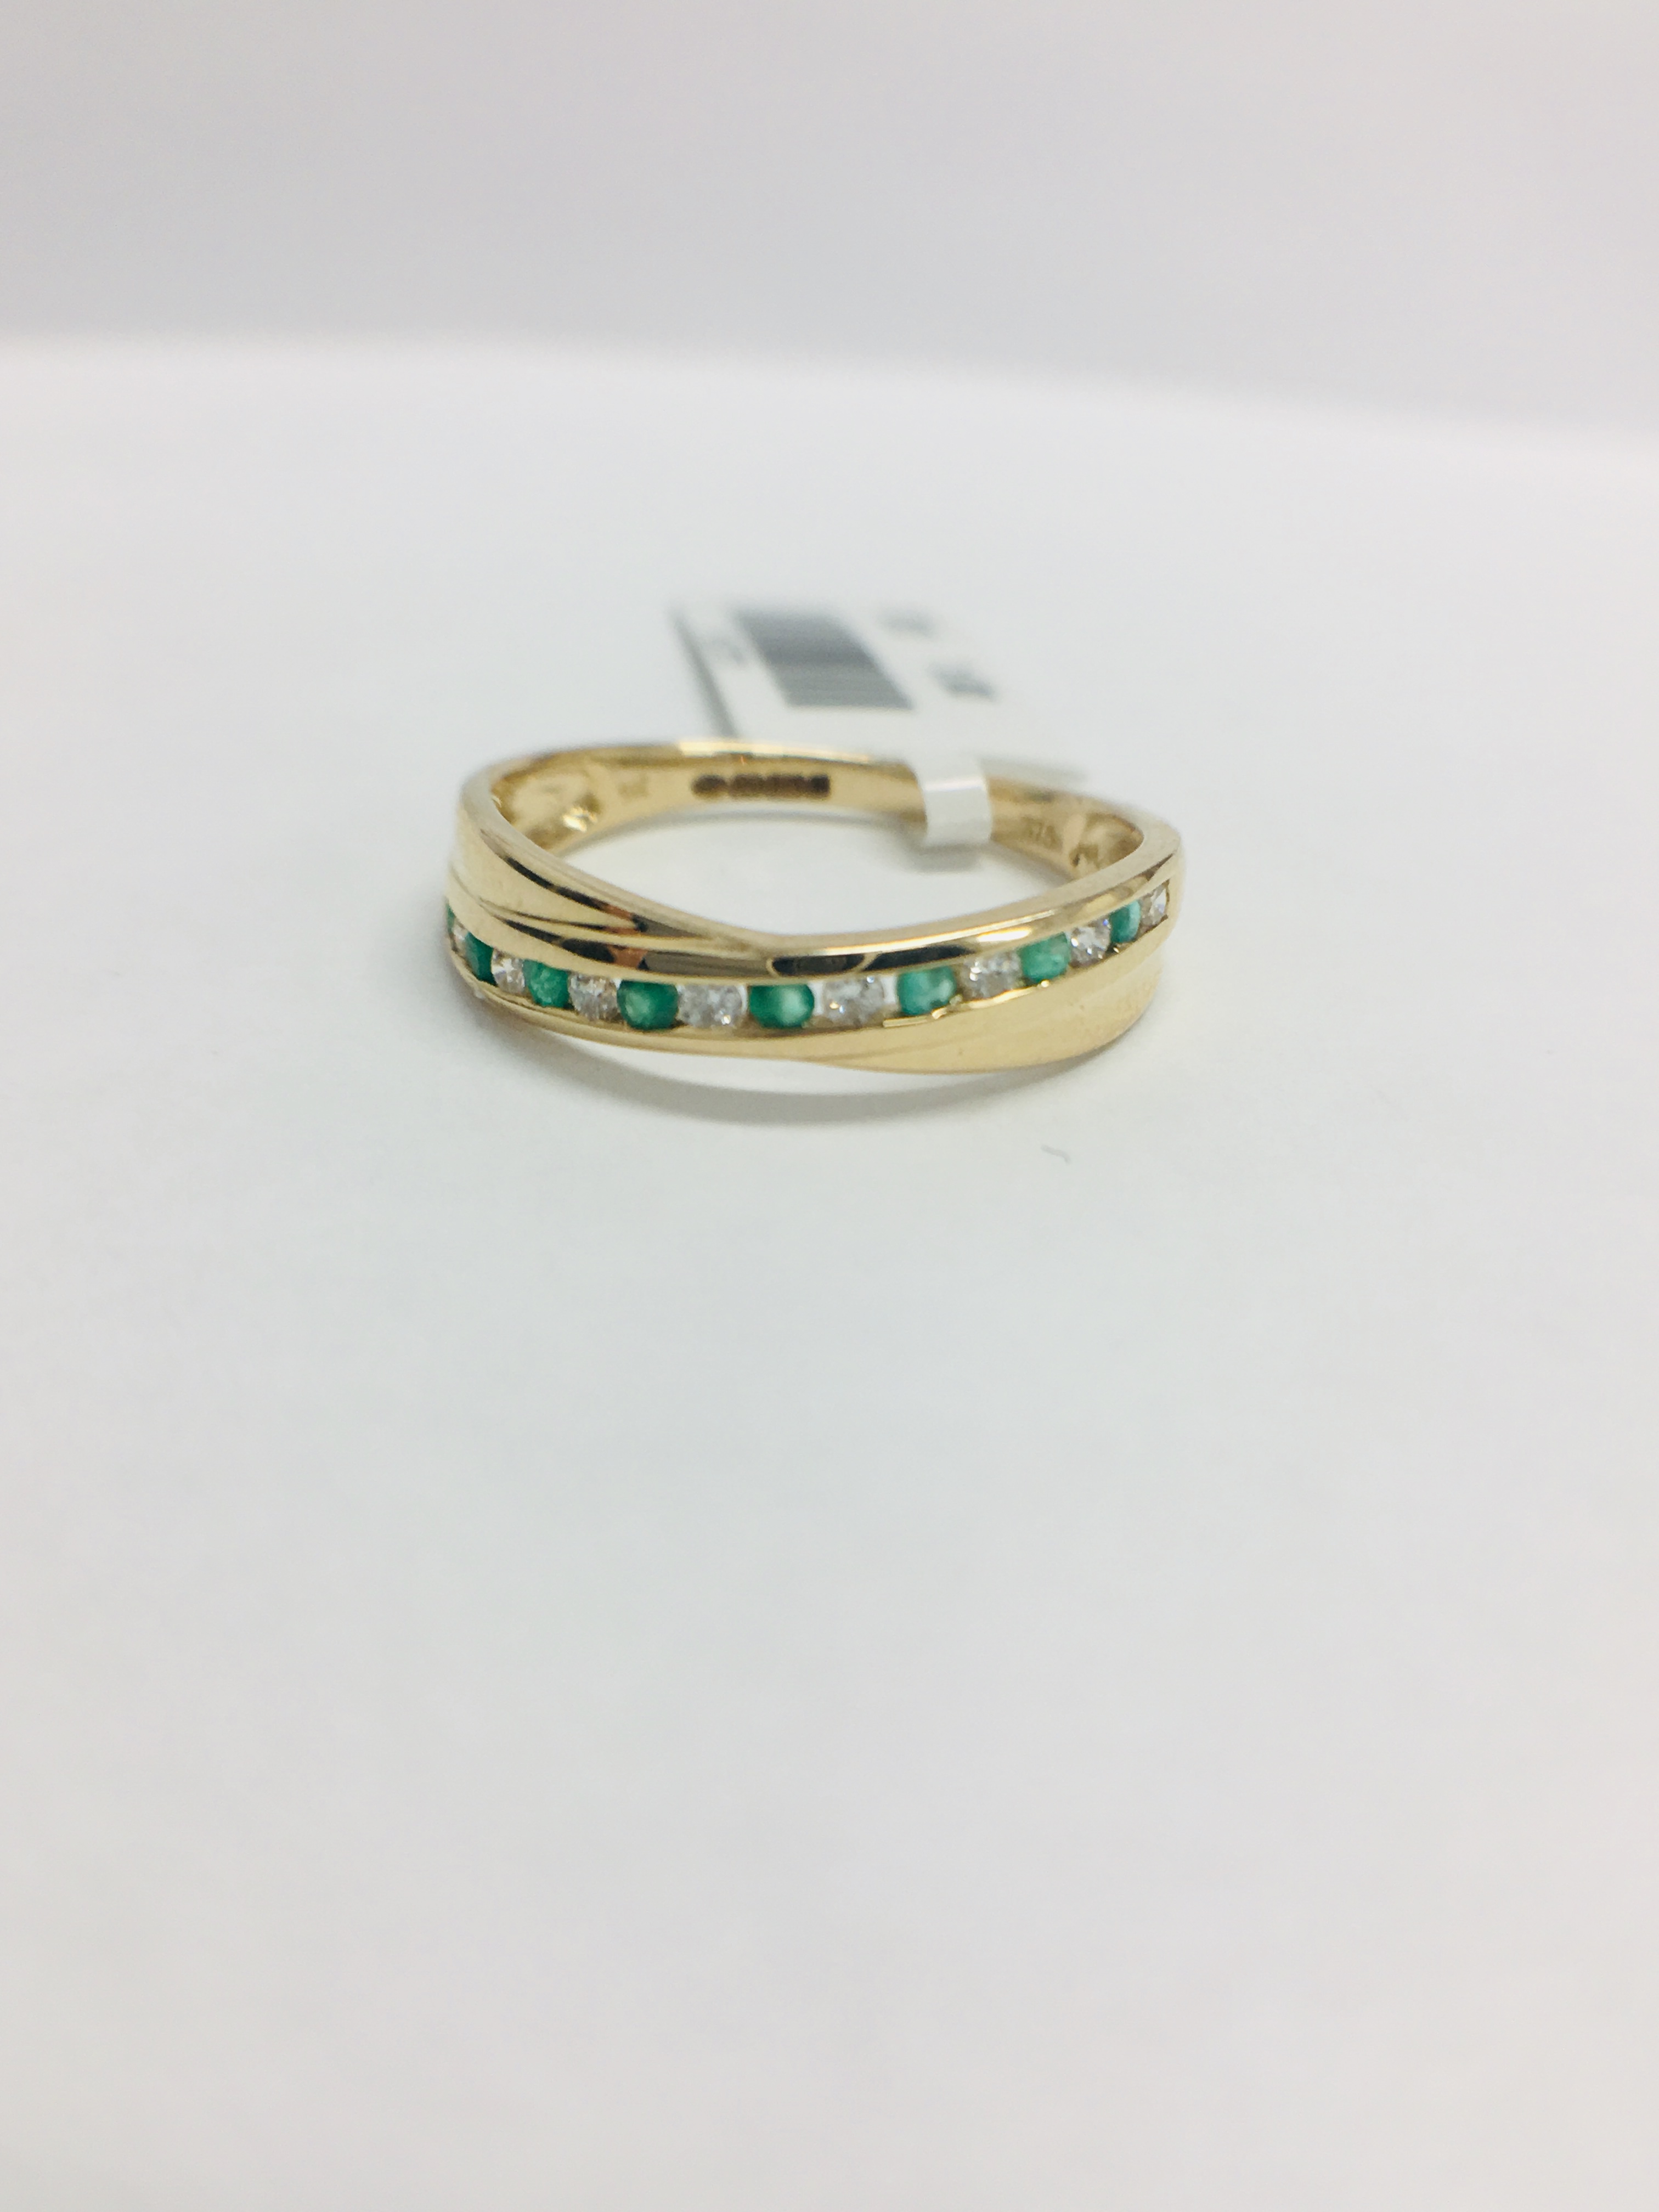 9Ct Yellow Gold Emerald Diamond Crossover Band Ring, - Image 10 of 11